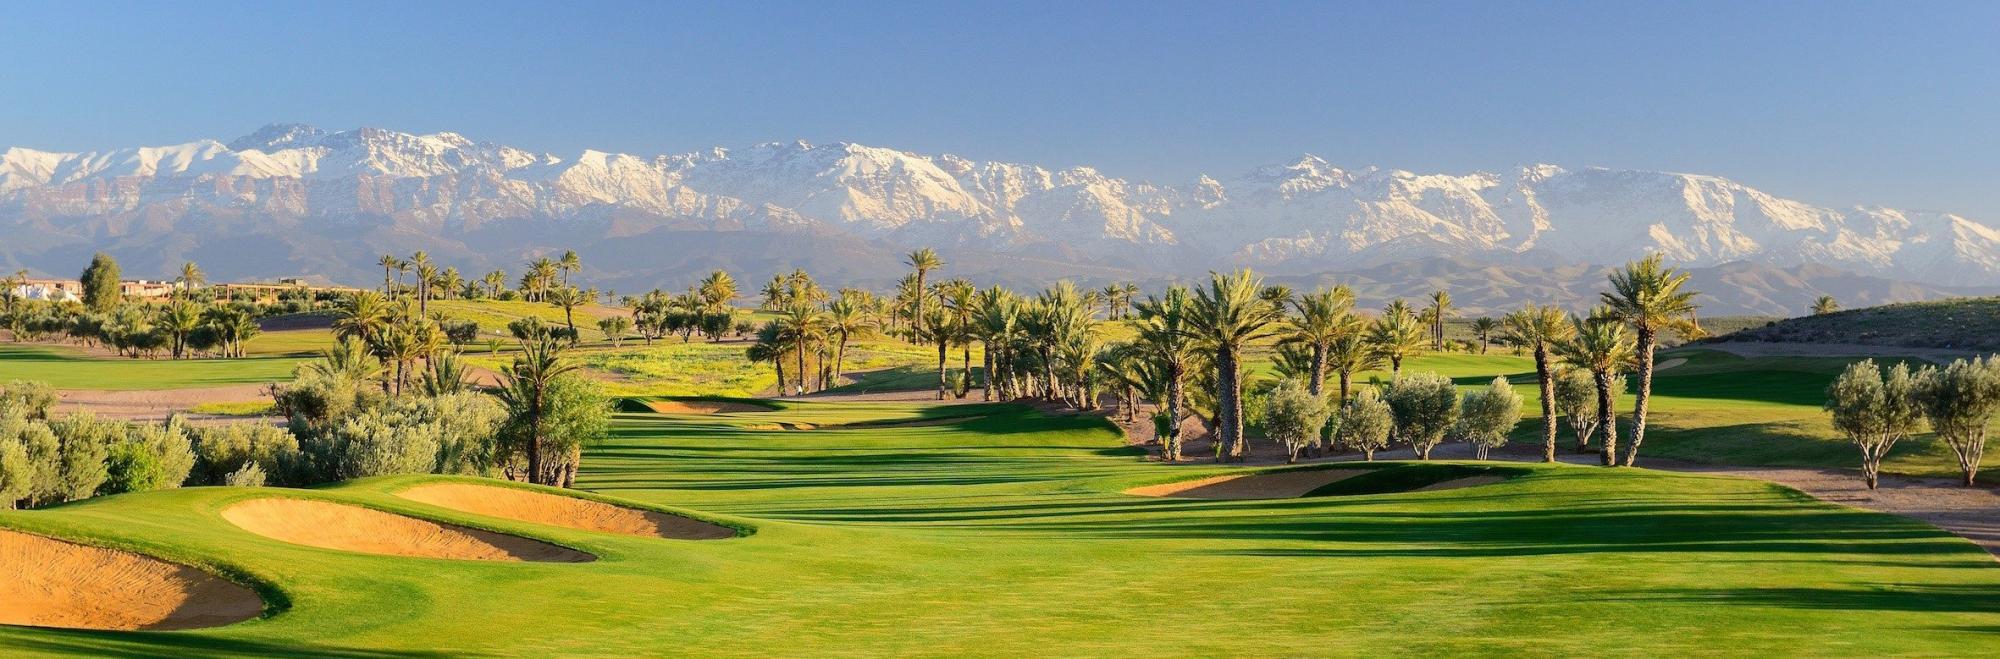 View Assoufid Golf Club's impressive golf course situated in incredible Morocco.